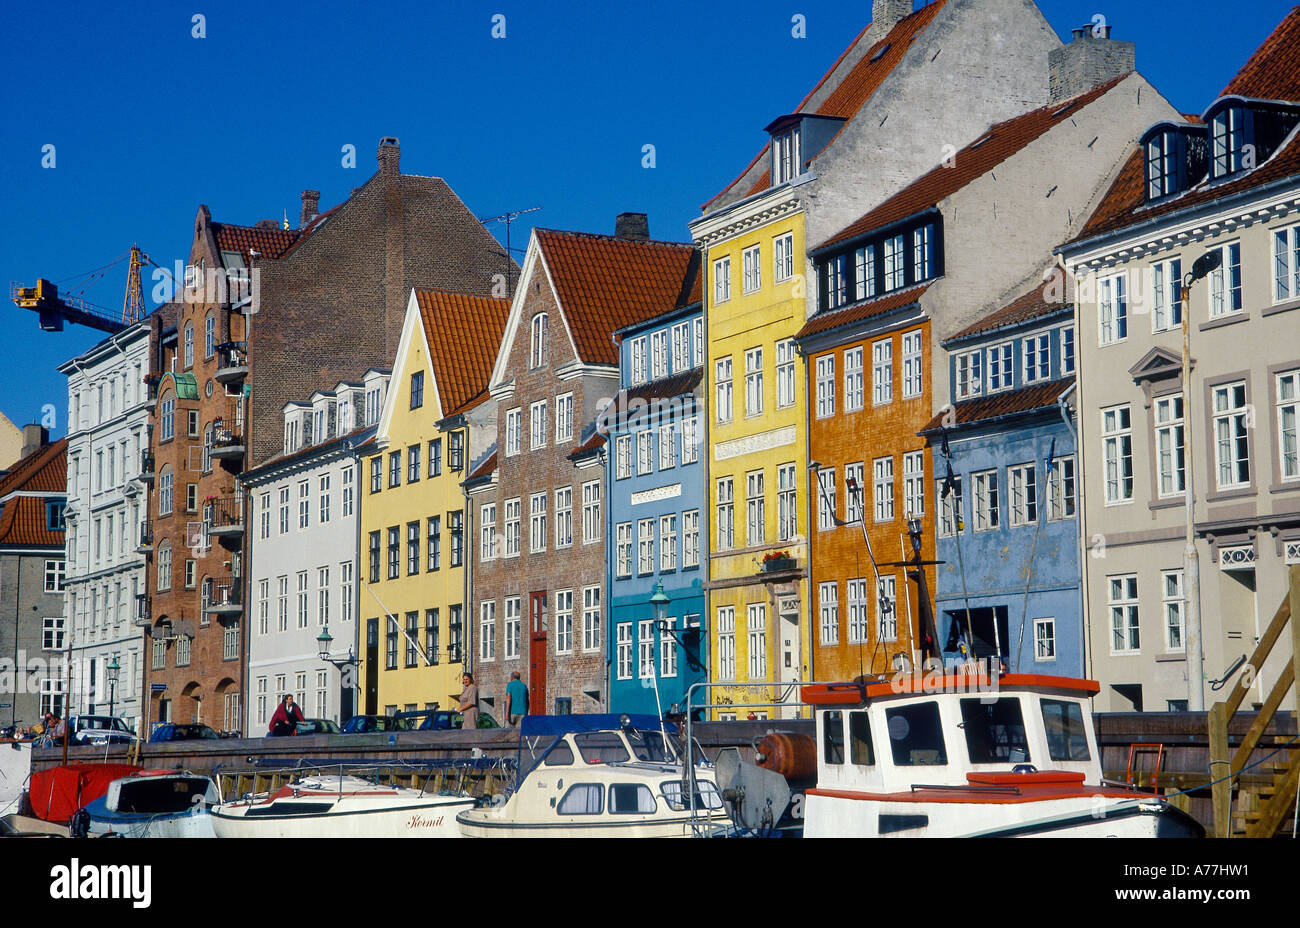 Nyhavn canal Row of C18th housefronts Painted different colours Crane Boats moored People on quay Stock Photo